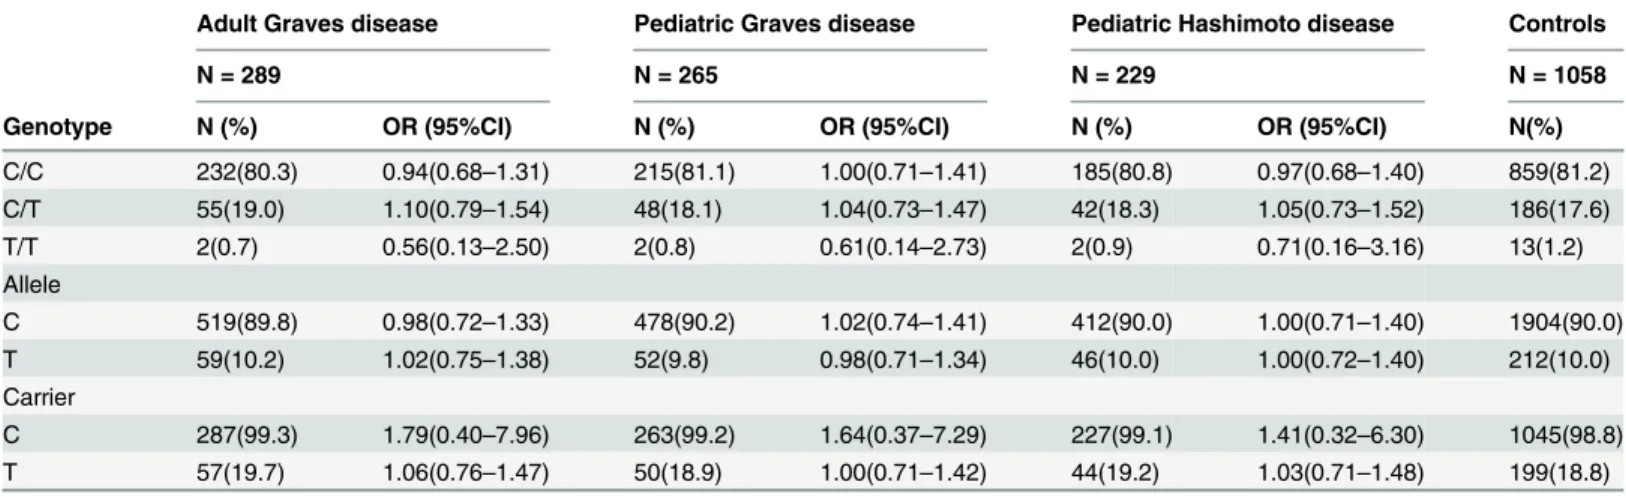 Table 1. Polymorphism of -318 C/T (rs5742909) of the CTLA4 gene in adult Graves disease, pediatric Graves disease, Hashimoto disease patients and controls.